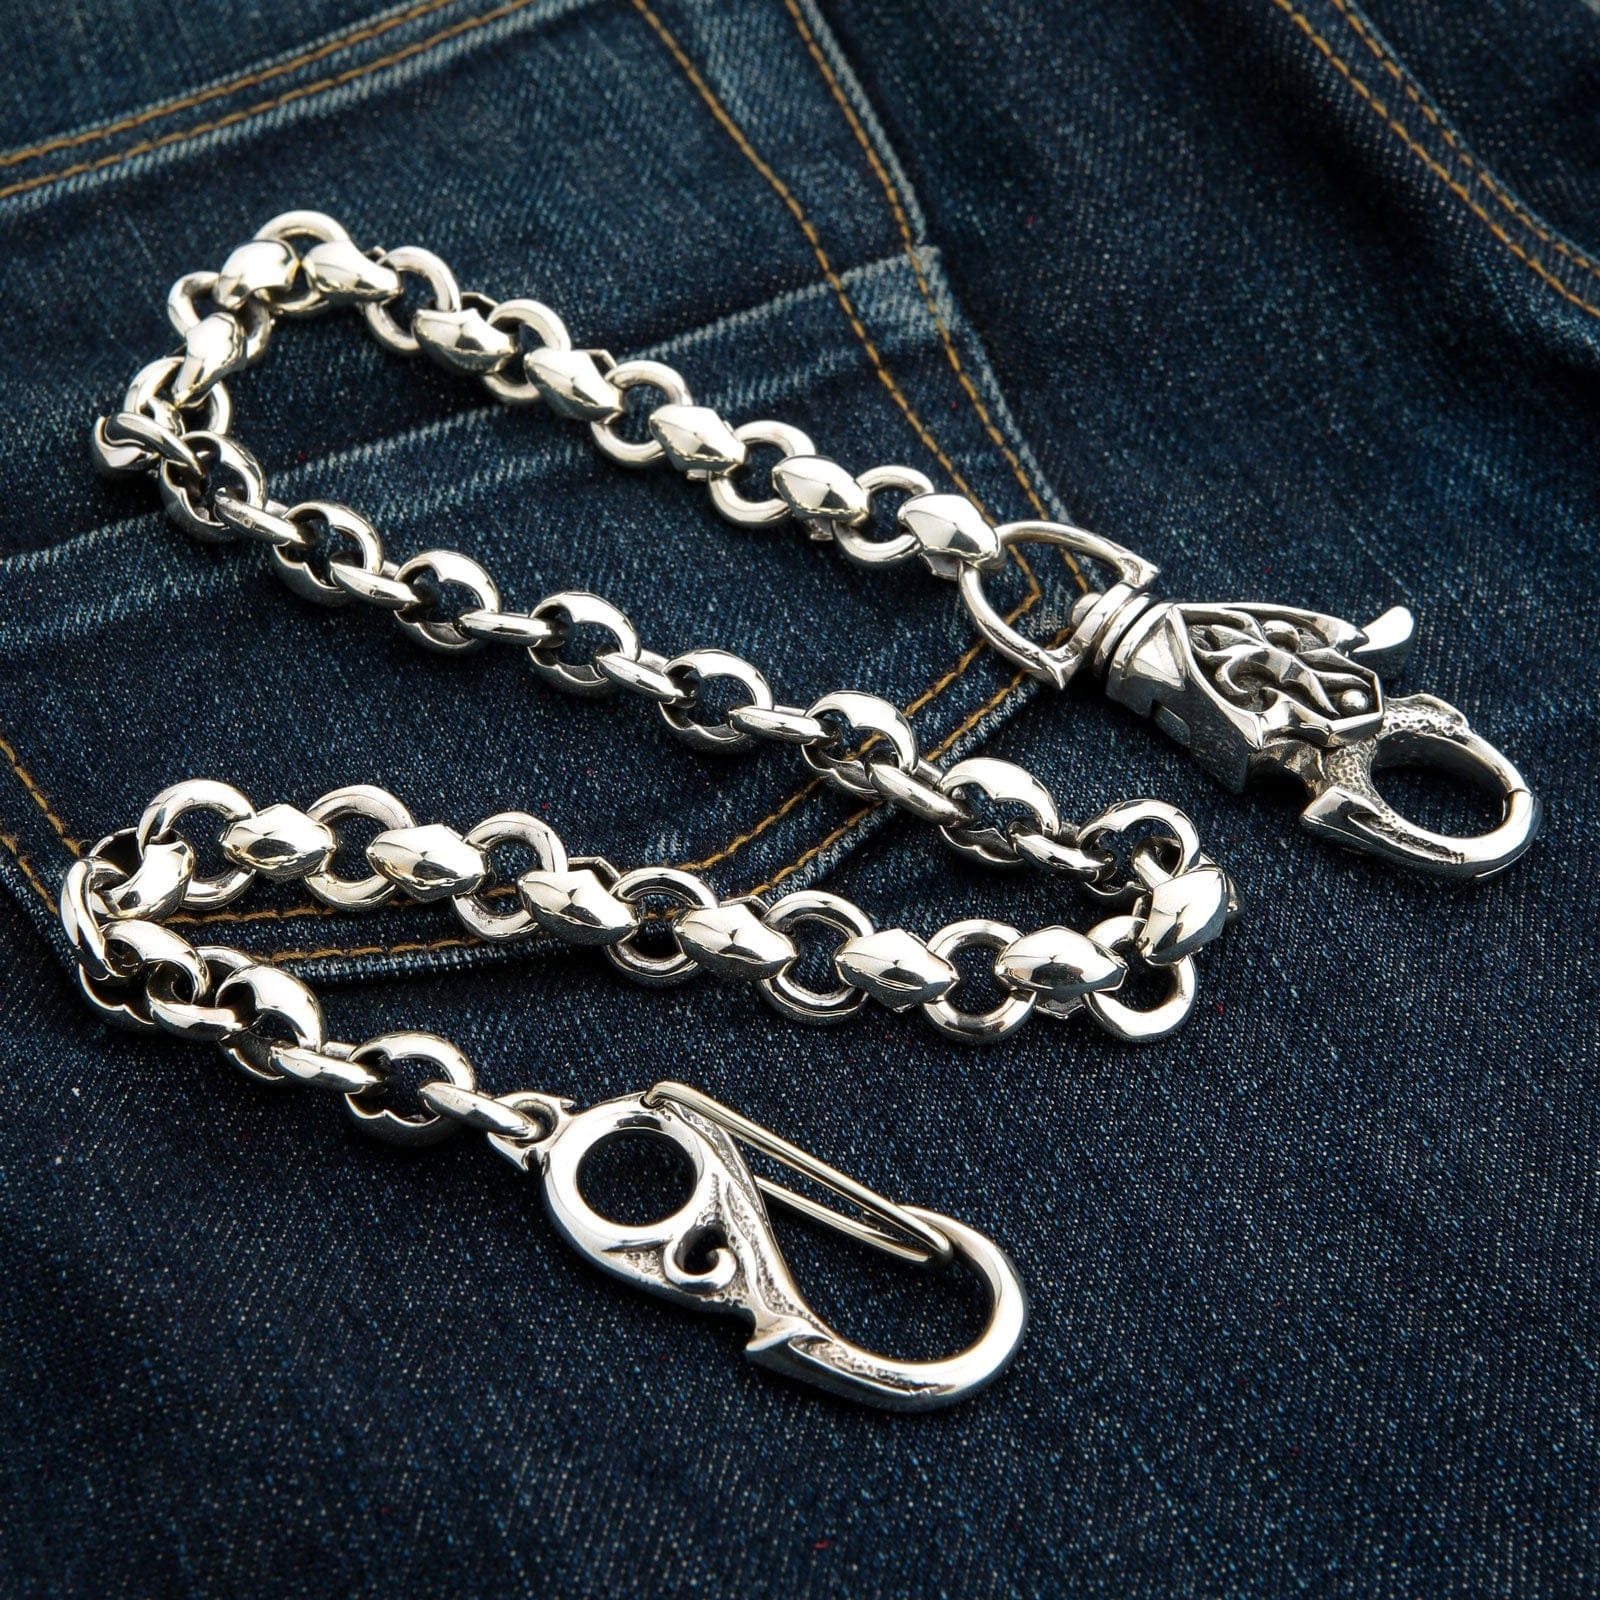 Handmade Sterling Silver Wallet Chain and Horsehide Wallet Collaboration — Black Bear Brand